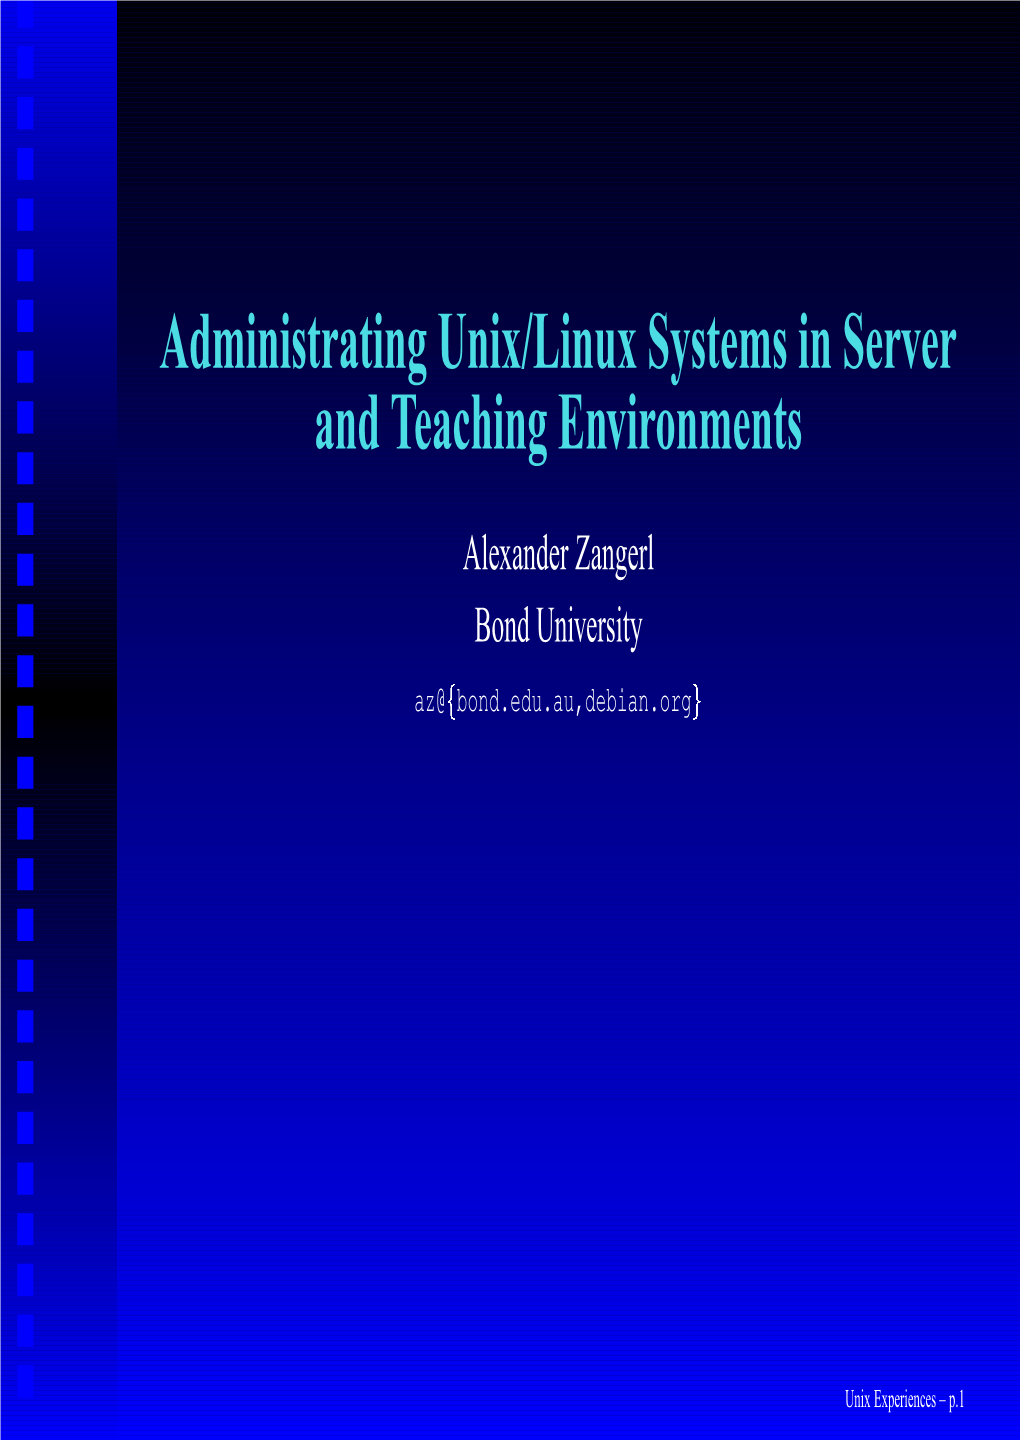 Administrating Unix/Linux Systems in Server and Teaching Environments